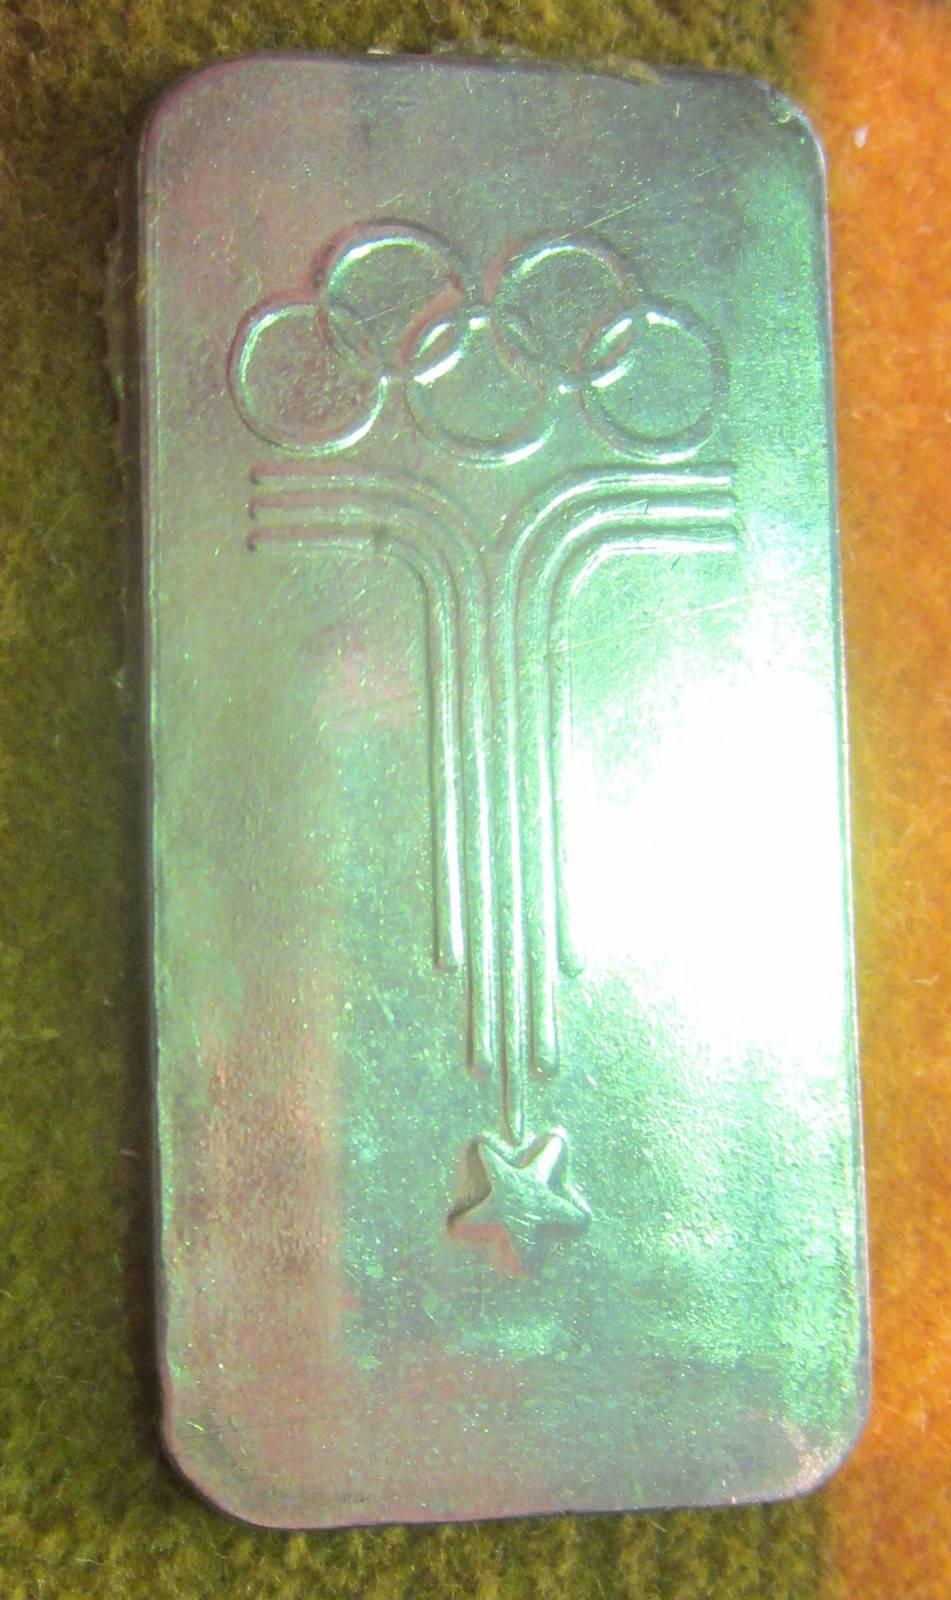 1980 Russian Moscow Olympics 24-piece silver plated cutlery set in a canteen,
pieces and canteen marked with Russian Olympic logo,
though two replacement pieces without logo
Canteen measures: 26 x 232 x 6.5cm high.
 